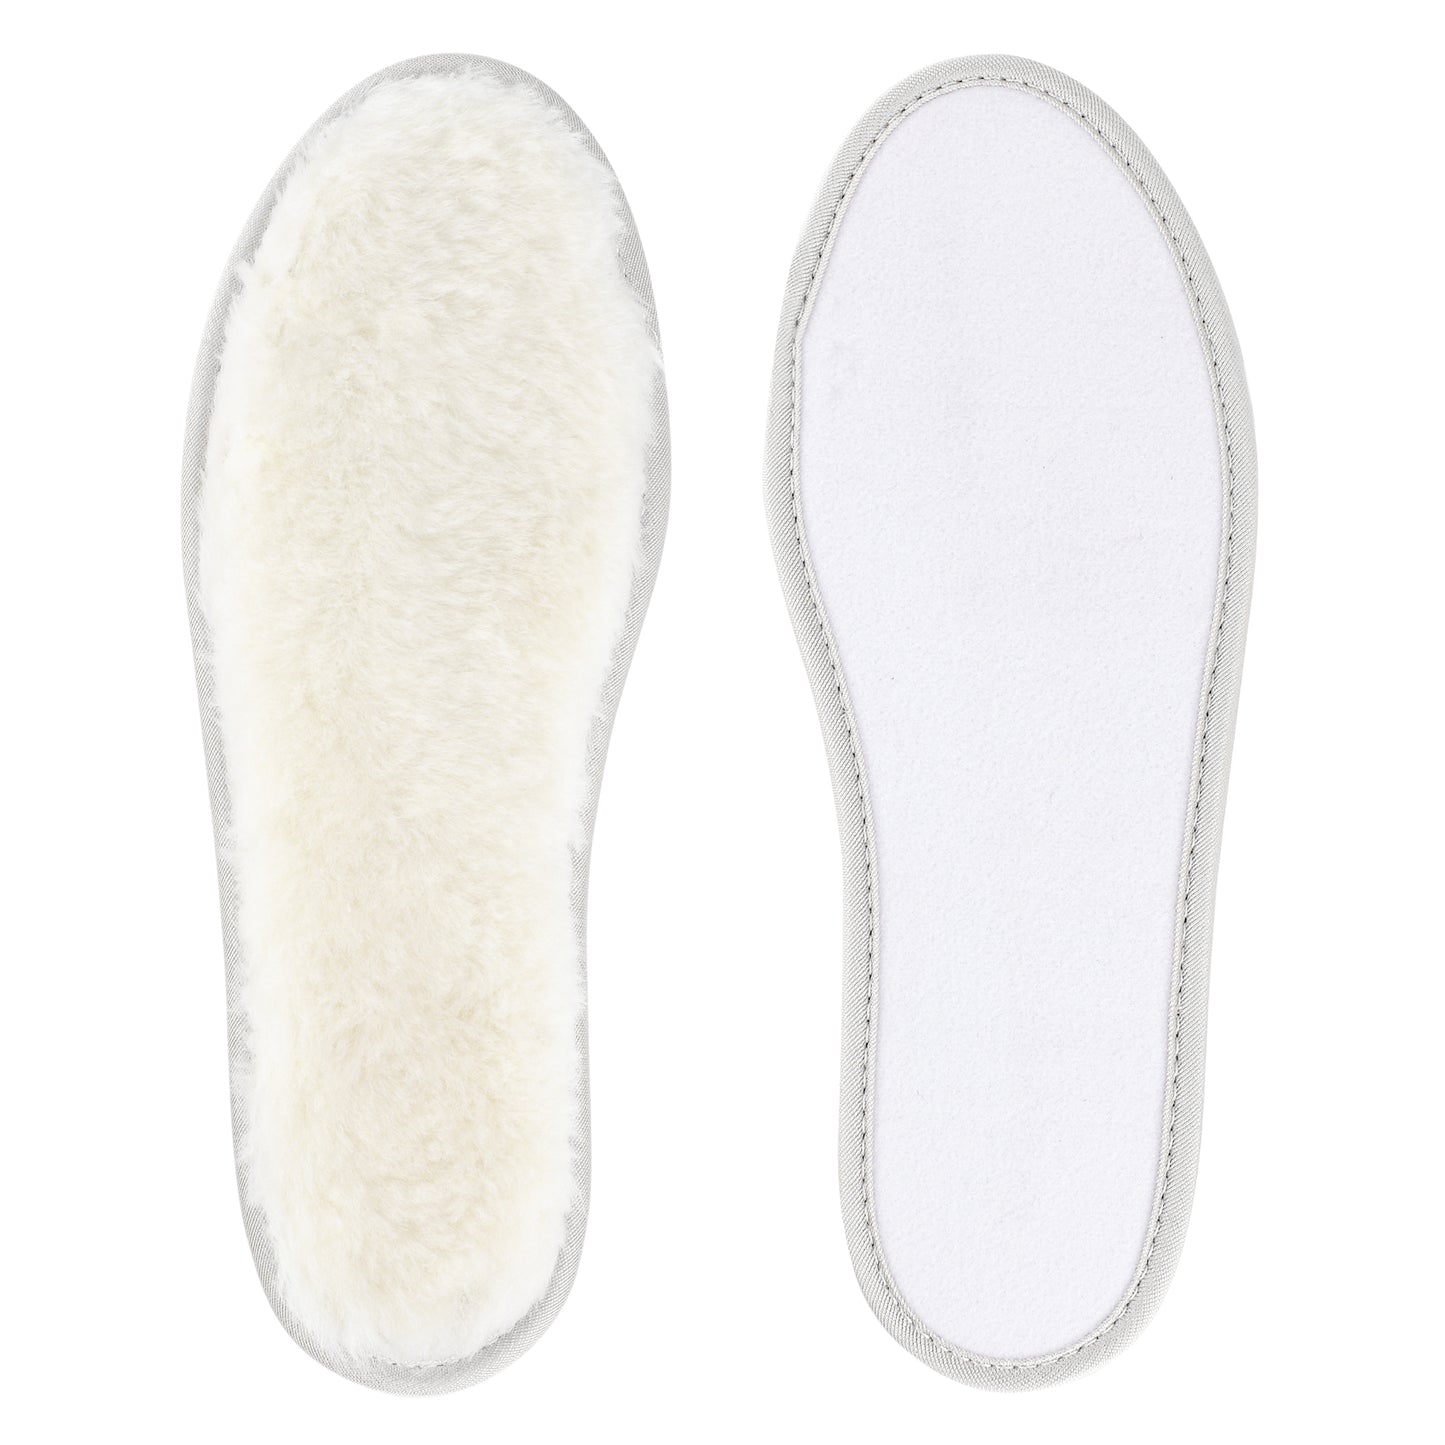 riemot Sheepskin Insoles for Men Women and Kids, White Wide, Super Thick Premium Lambswool Insoles for Wellies Slippers Boots